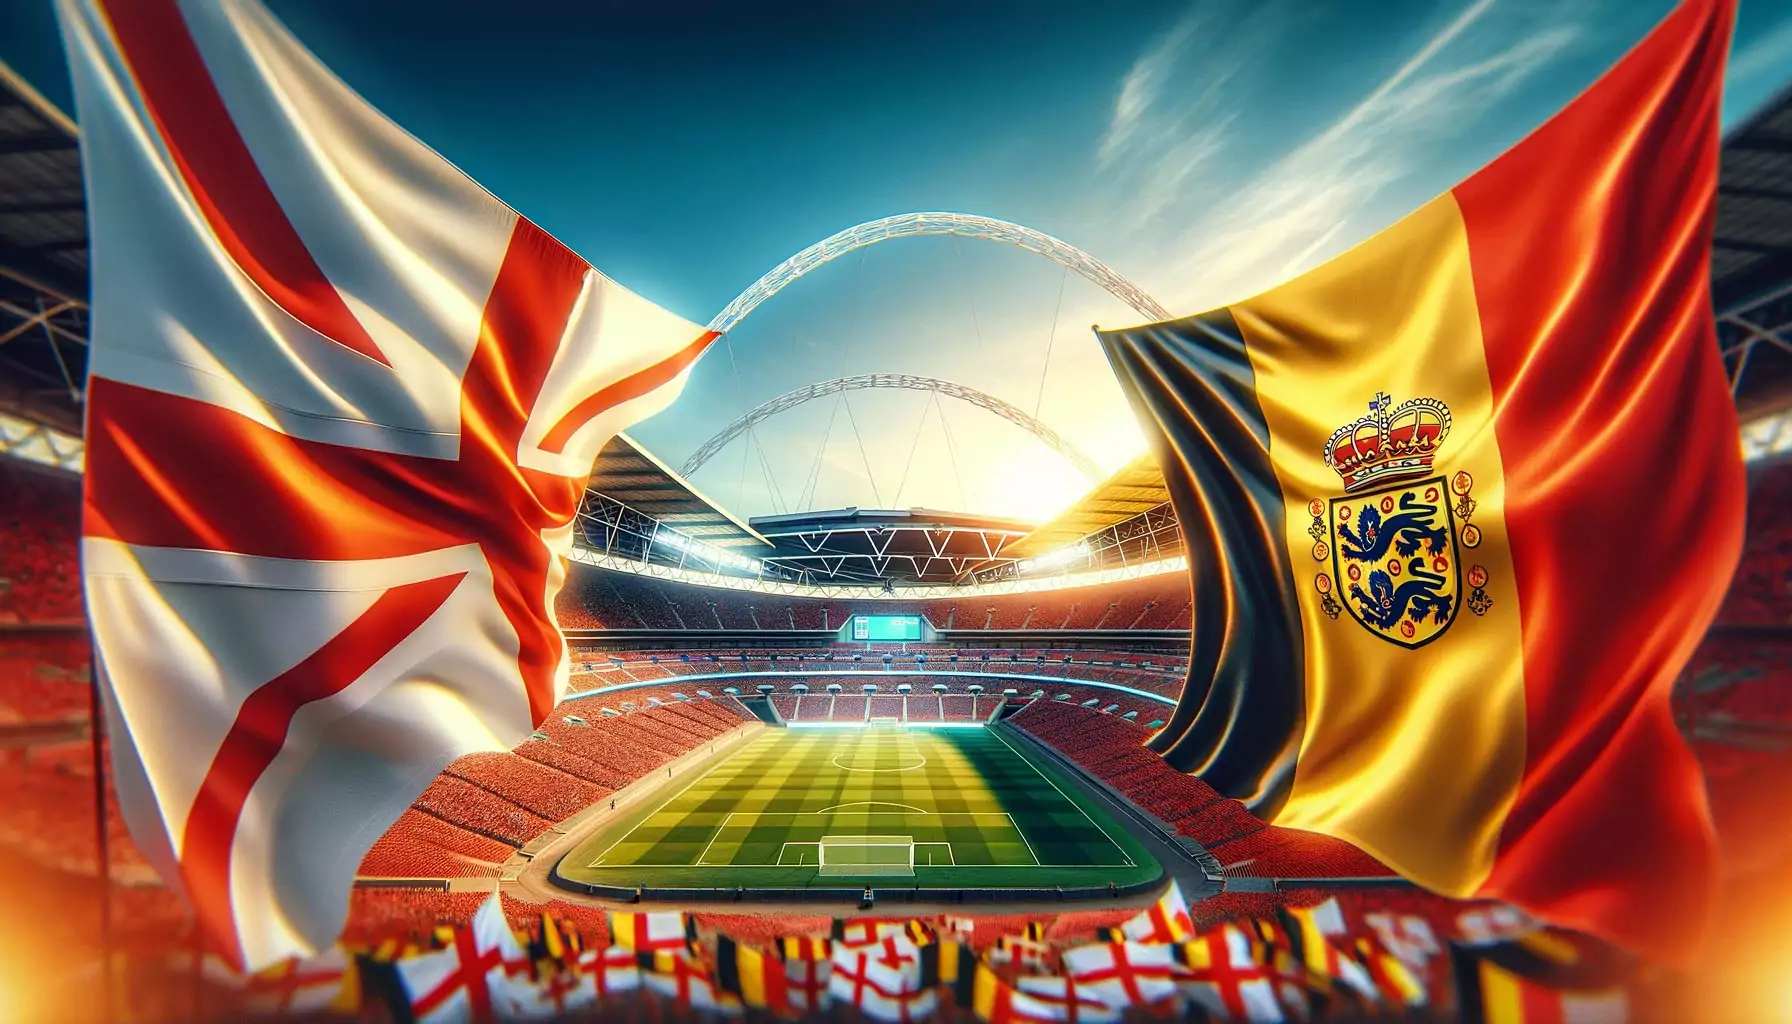 A vibrant scene depicting the flags of England and Belgium prominently displayed in the foreground with the iconic Wembley Stadium serving as the maje